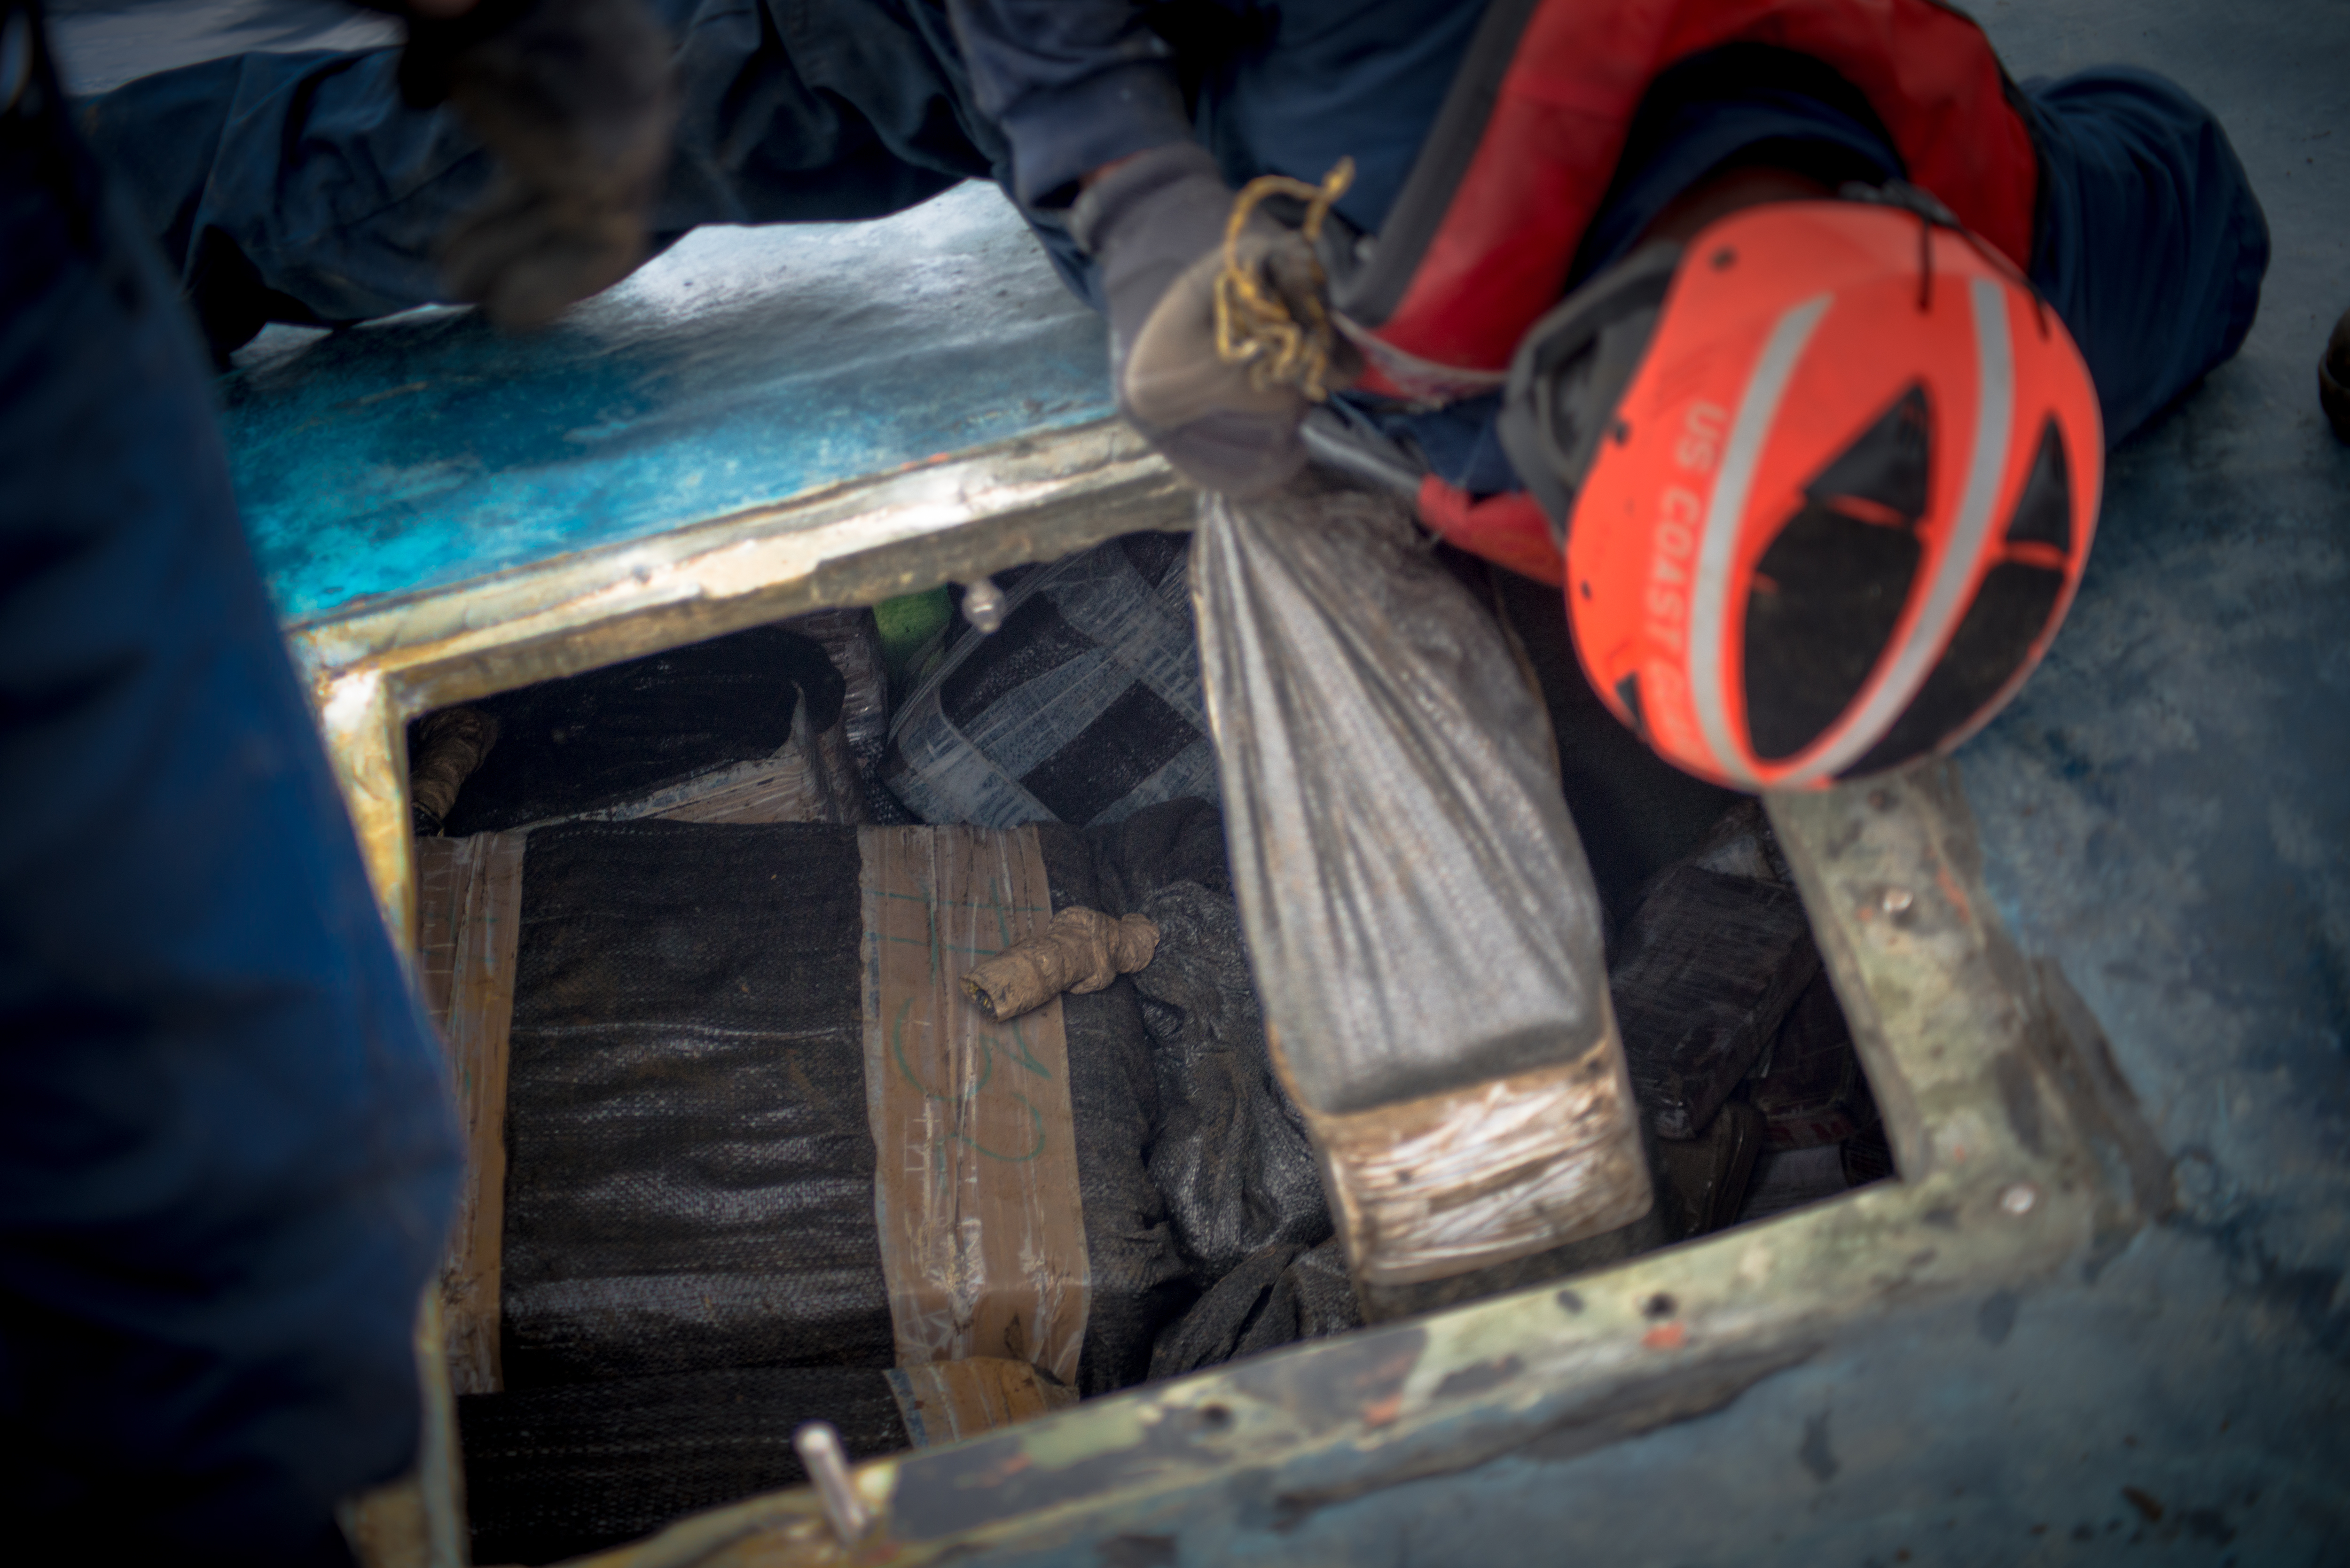 A Coast Guard Cutter Stratton boarding team seizes cocaine bales from a self-propelled semi-submersible interdicted in international waters off the coast of Central America, July 19, 2015. The Coast Guard recovered more than 6 tons of cocaine from the 40-foot vessel. (Coast Guard photo courtesy of Petty Officer 2nd Class LaNola Stone)